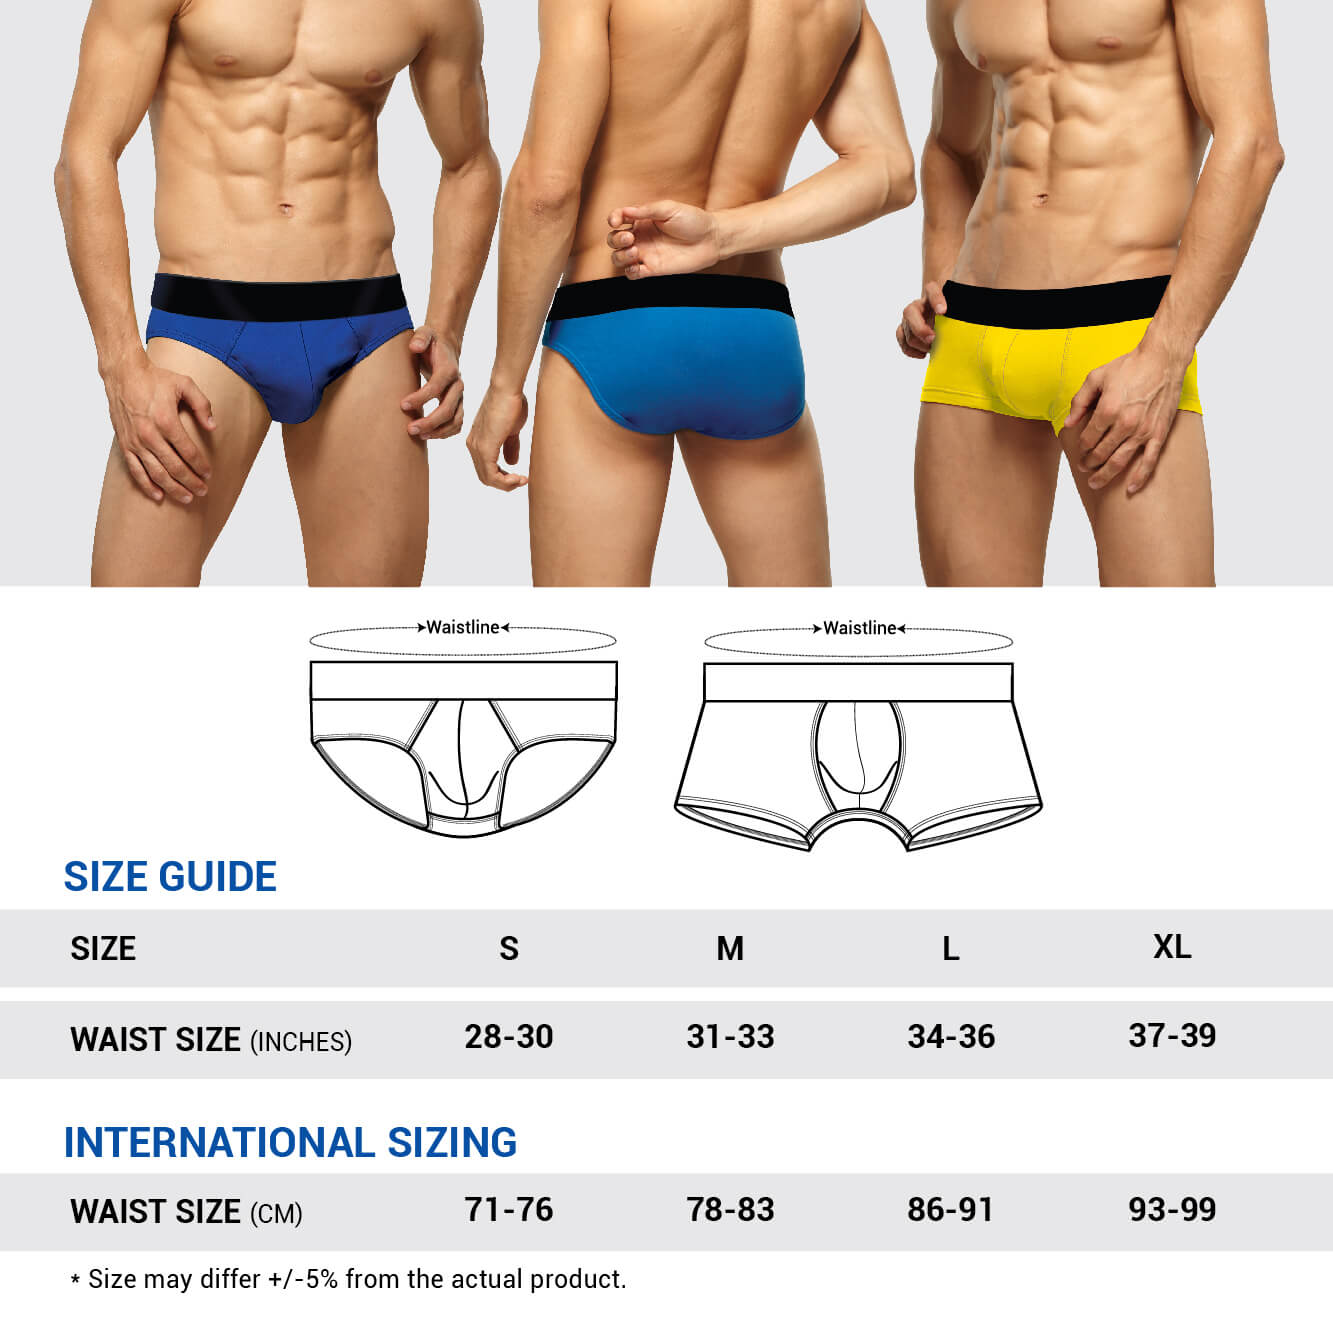 Mens underwear size guide for boxer briefs and briefs. Identify your correct size in CM and inches